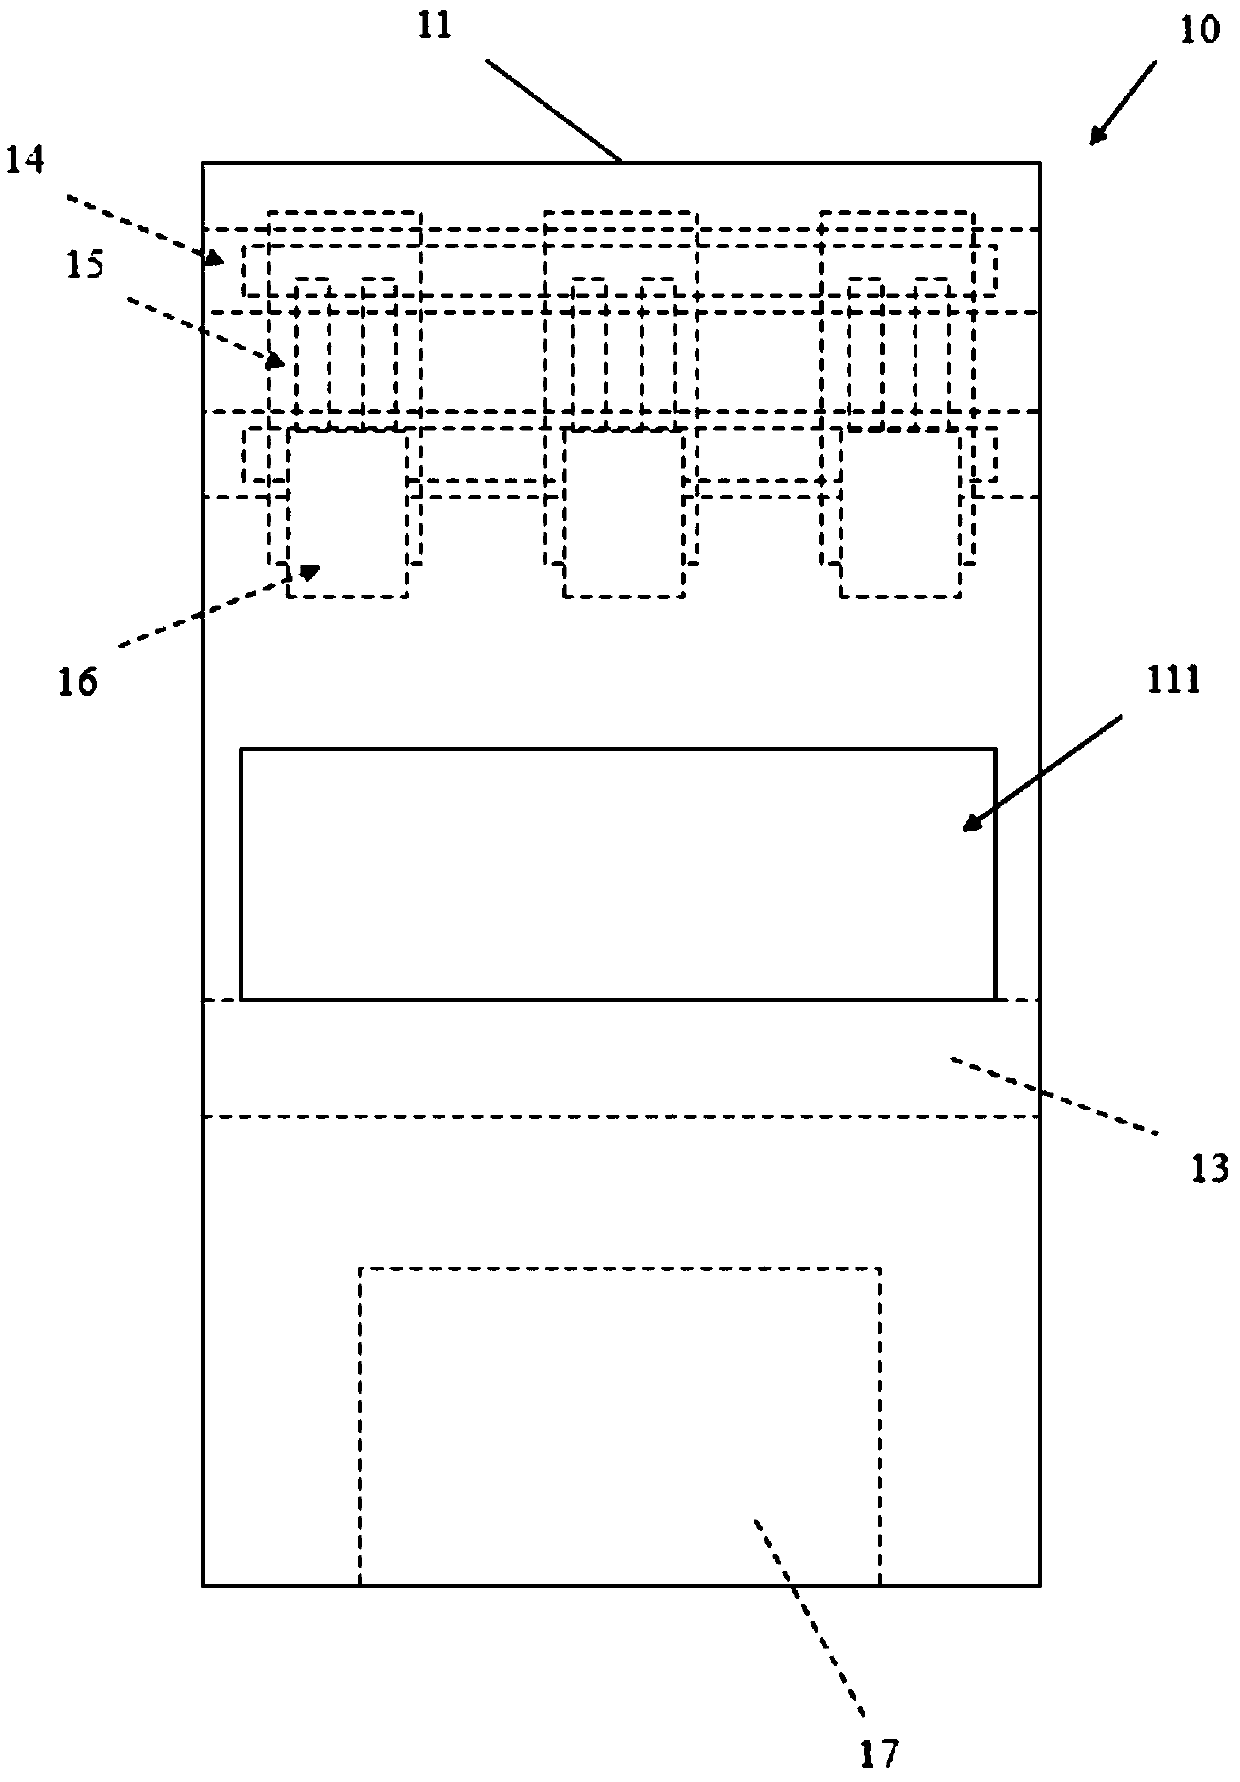 Detection device for circuit board component detection of assembly line